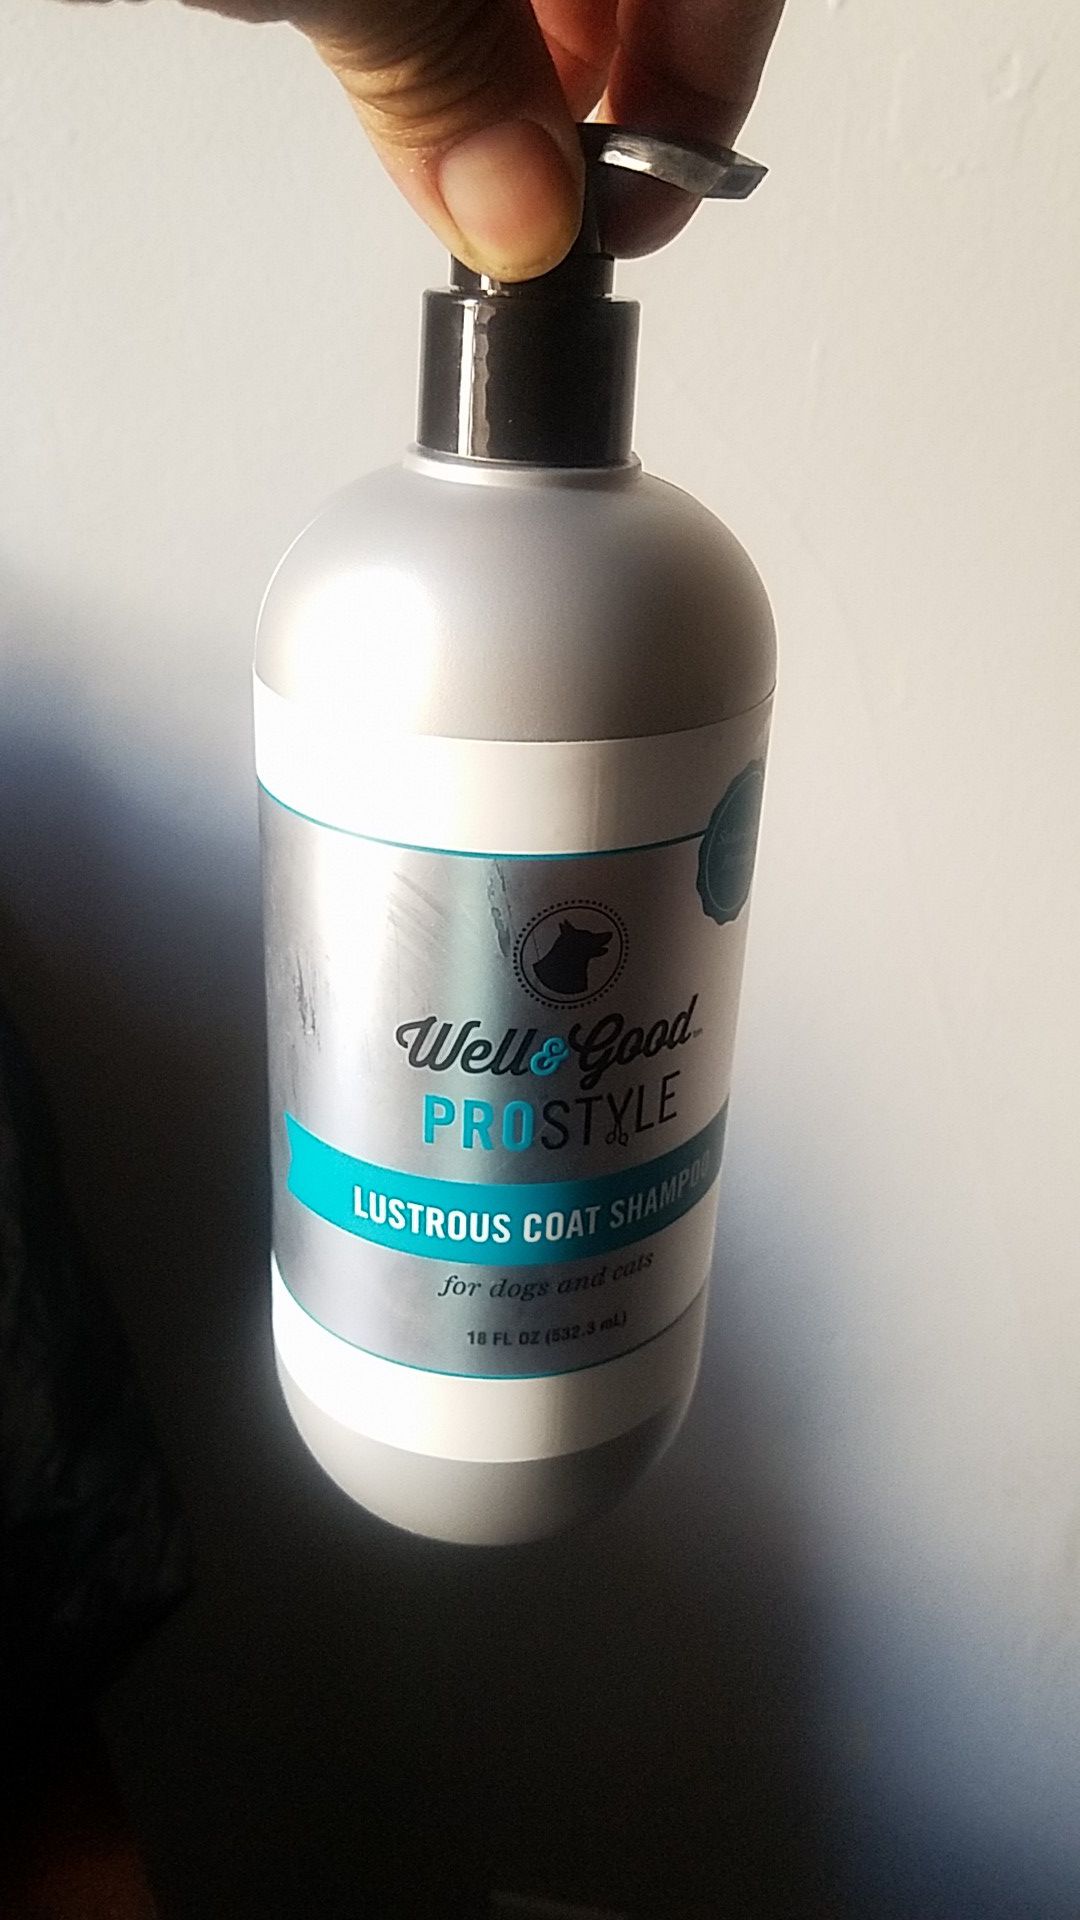 Well and good pro style dog and cat shampoo